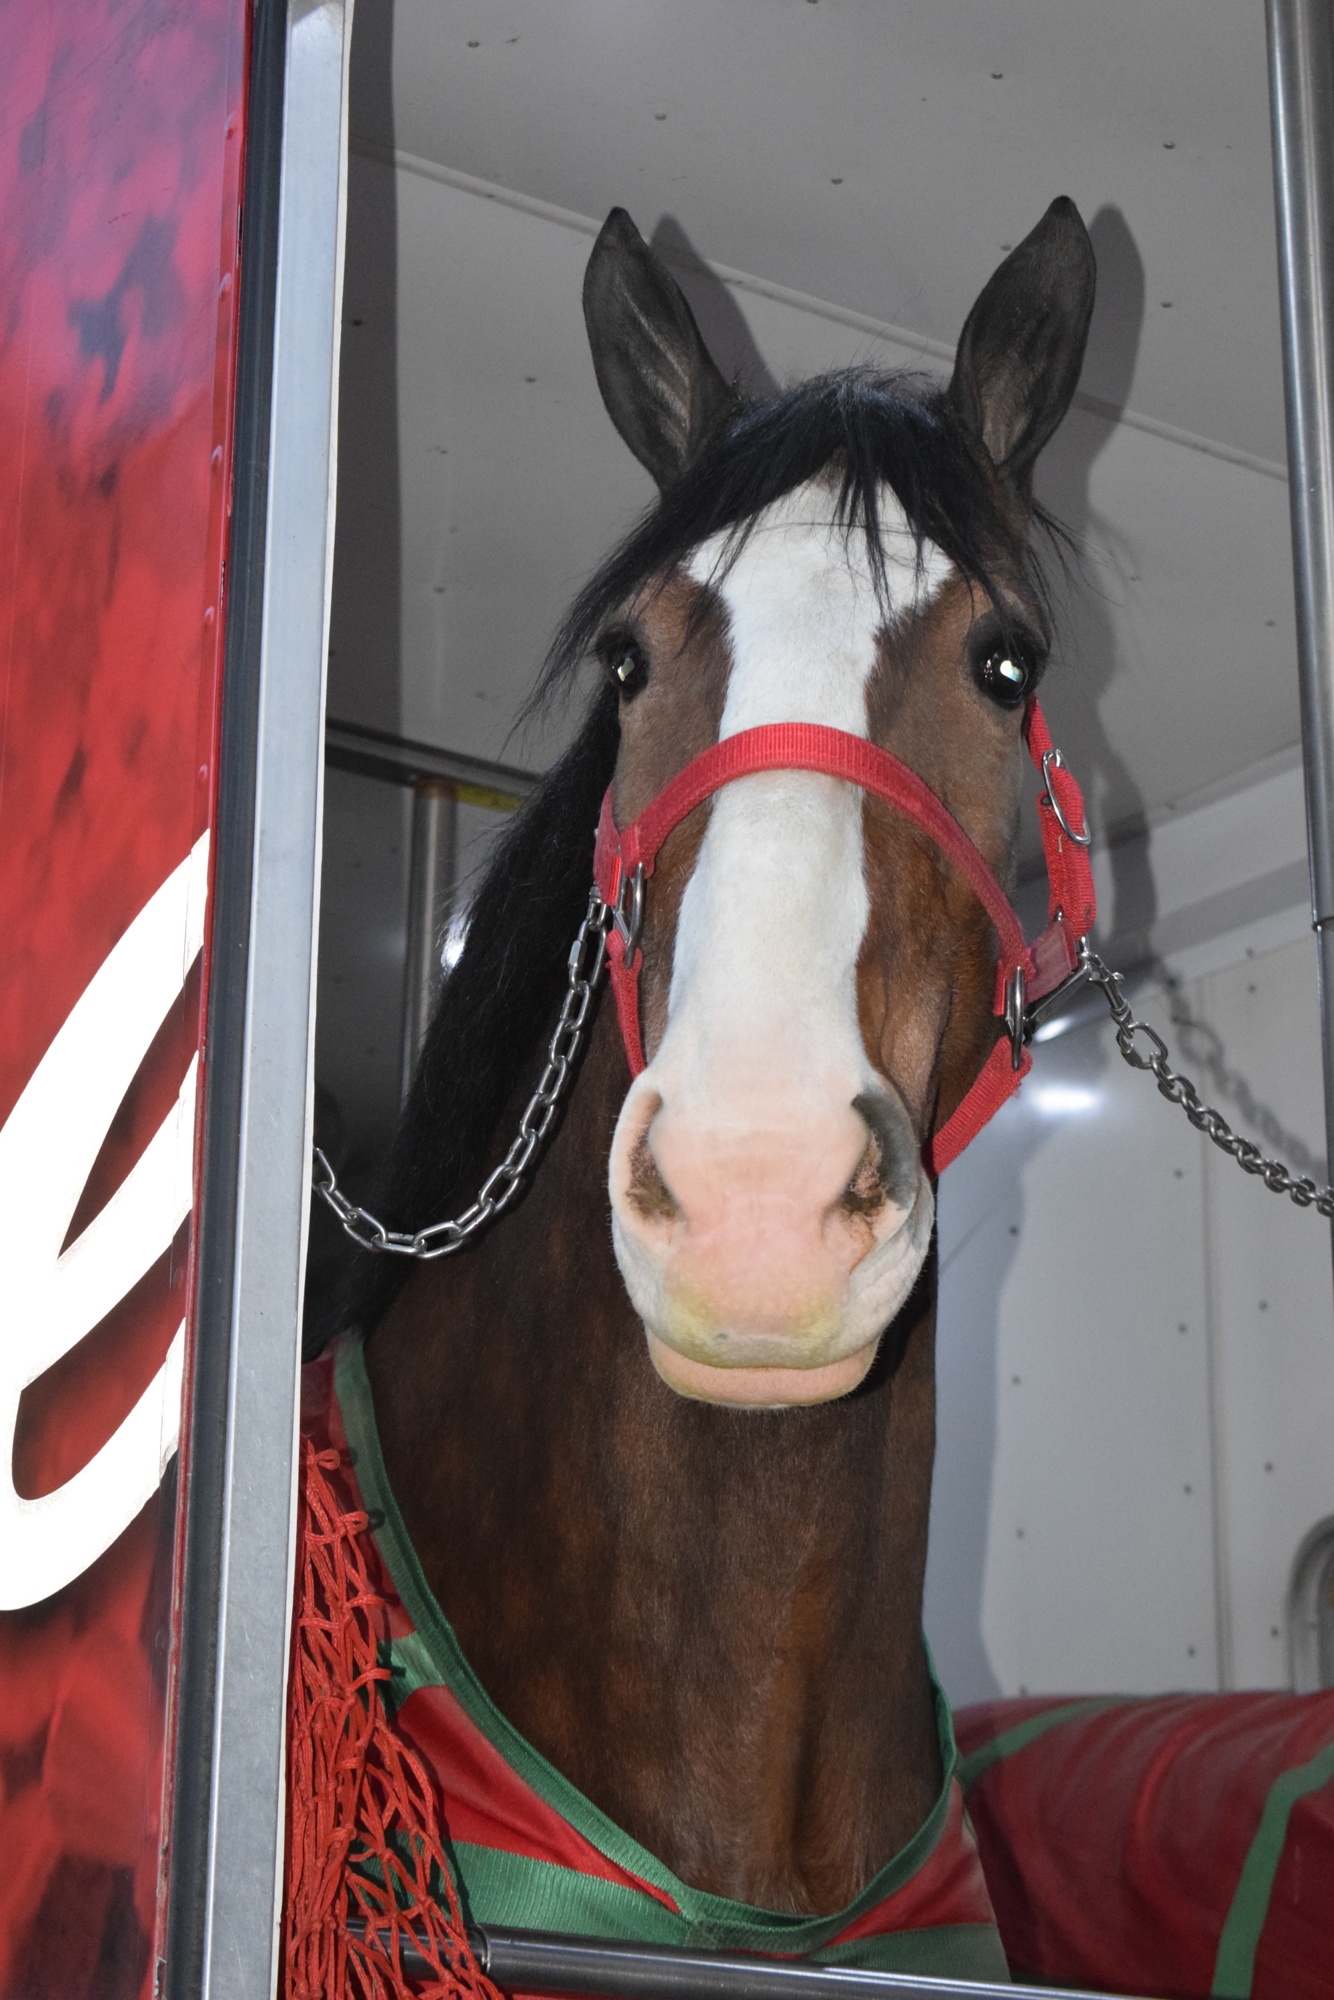 The Clydesdales have a busy schedule this week in the region.